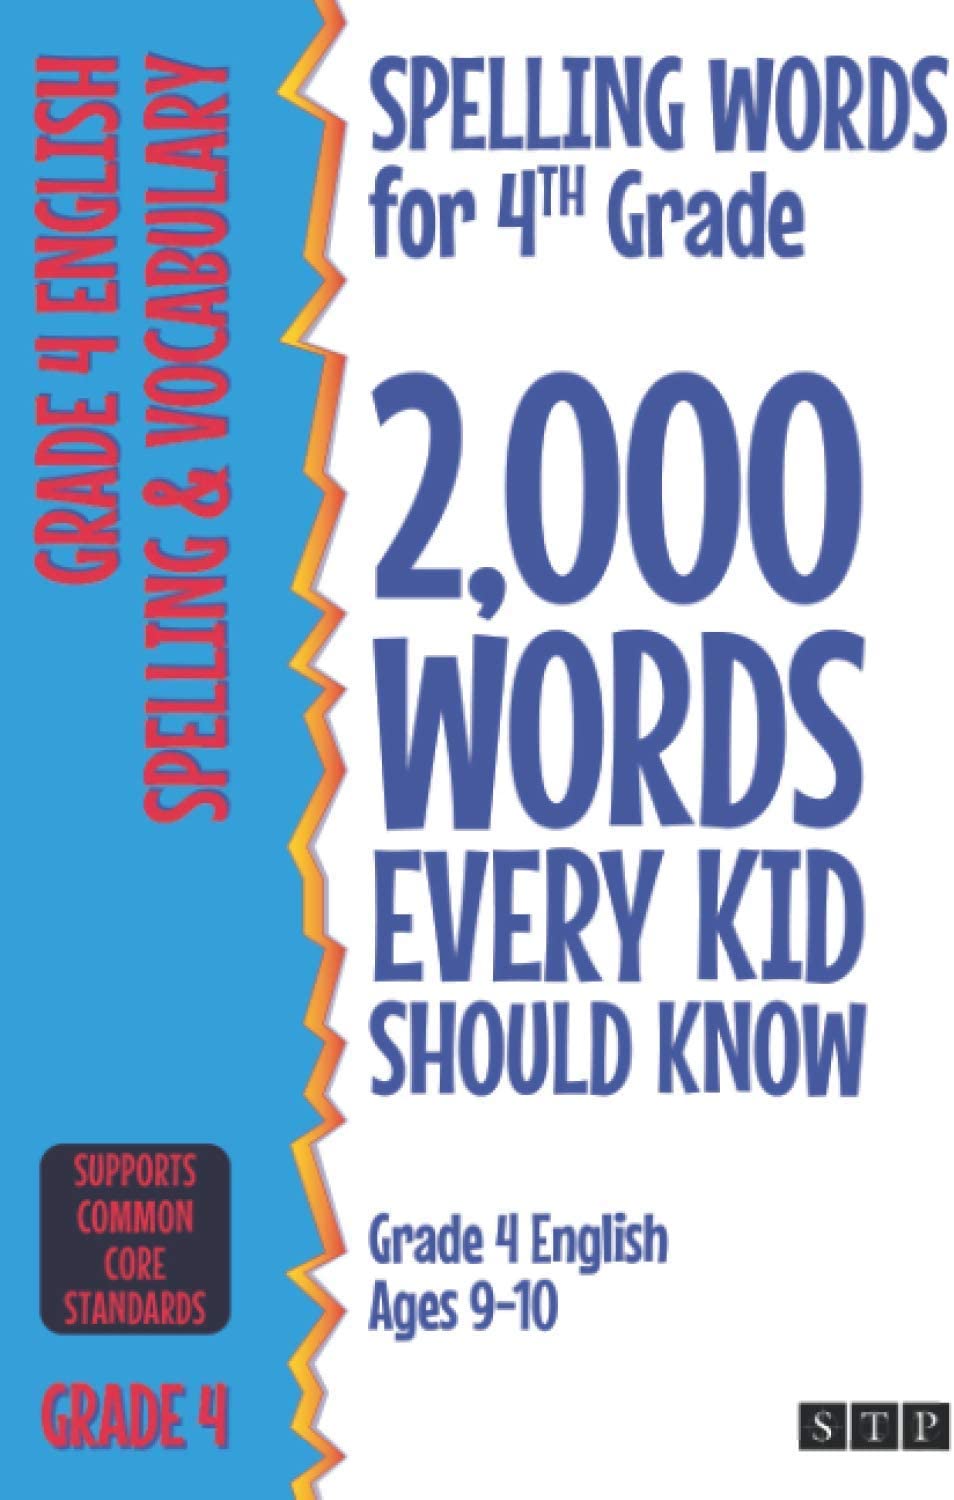 Spelling Words for 4th Grade: 2,000 Words Every Kid Should Know (Grade 4 English Ages 9-10) (2,000 Spelling Words (US Editions))